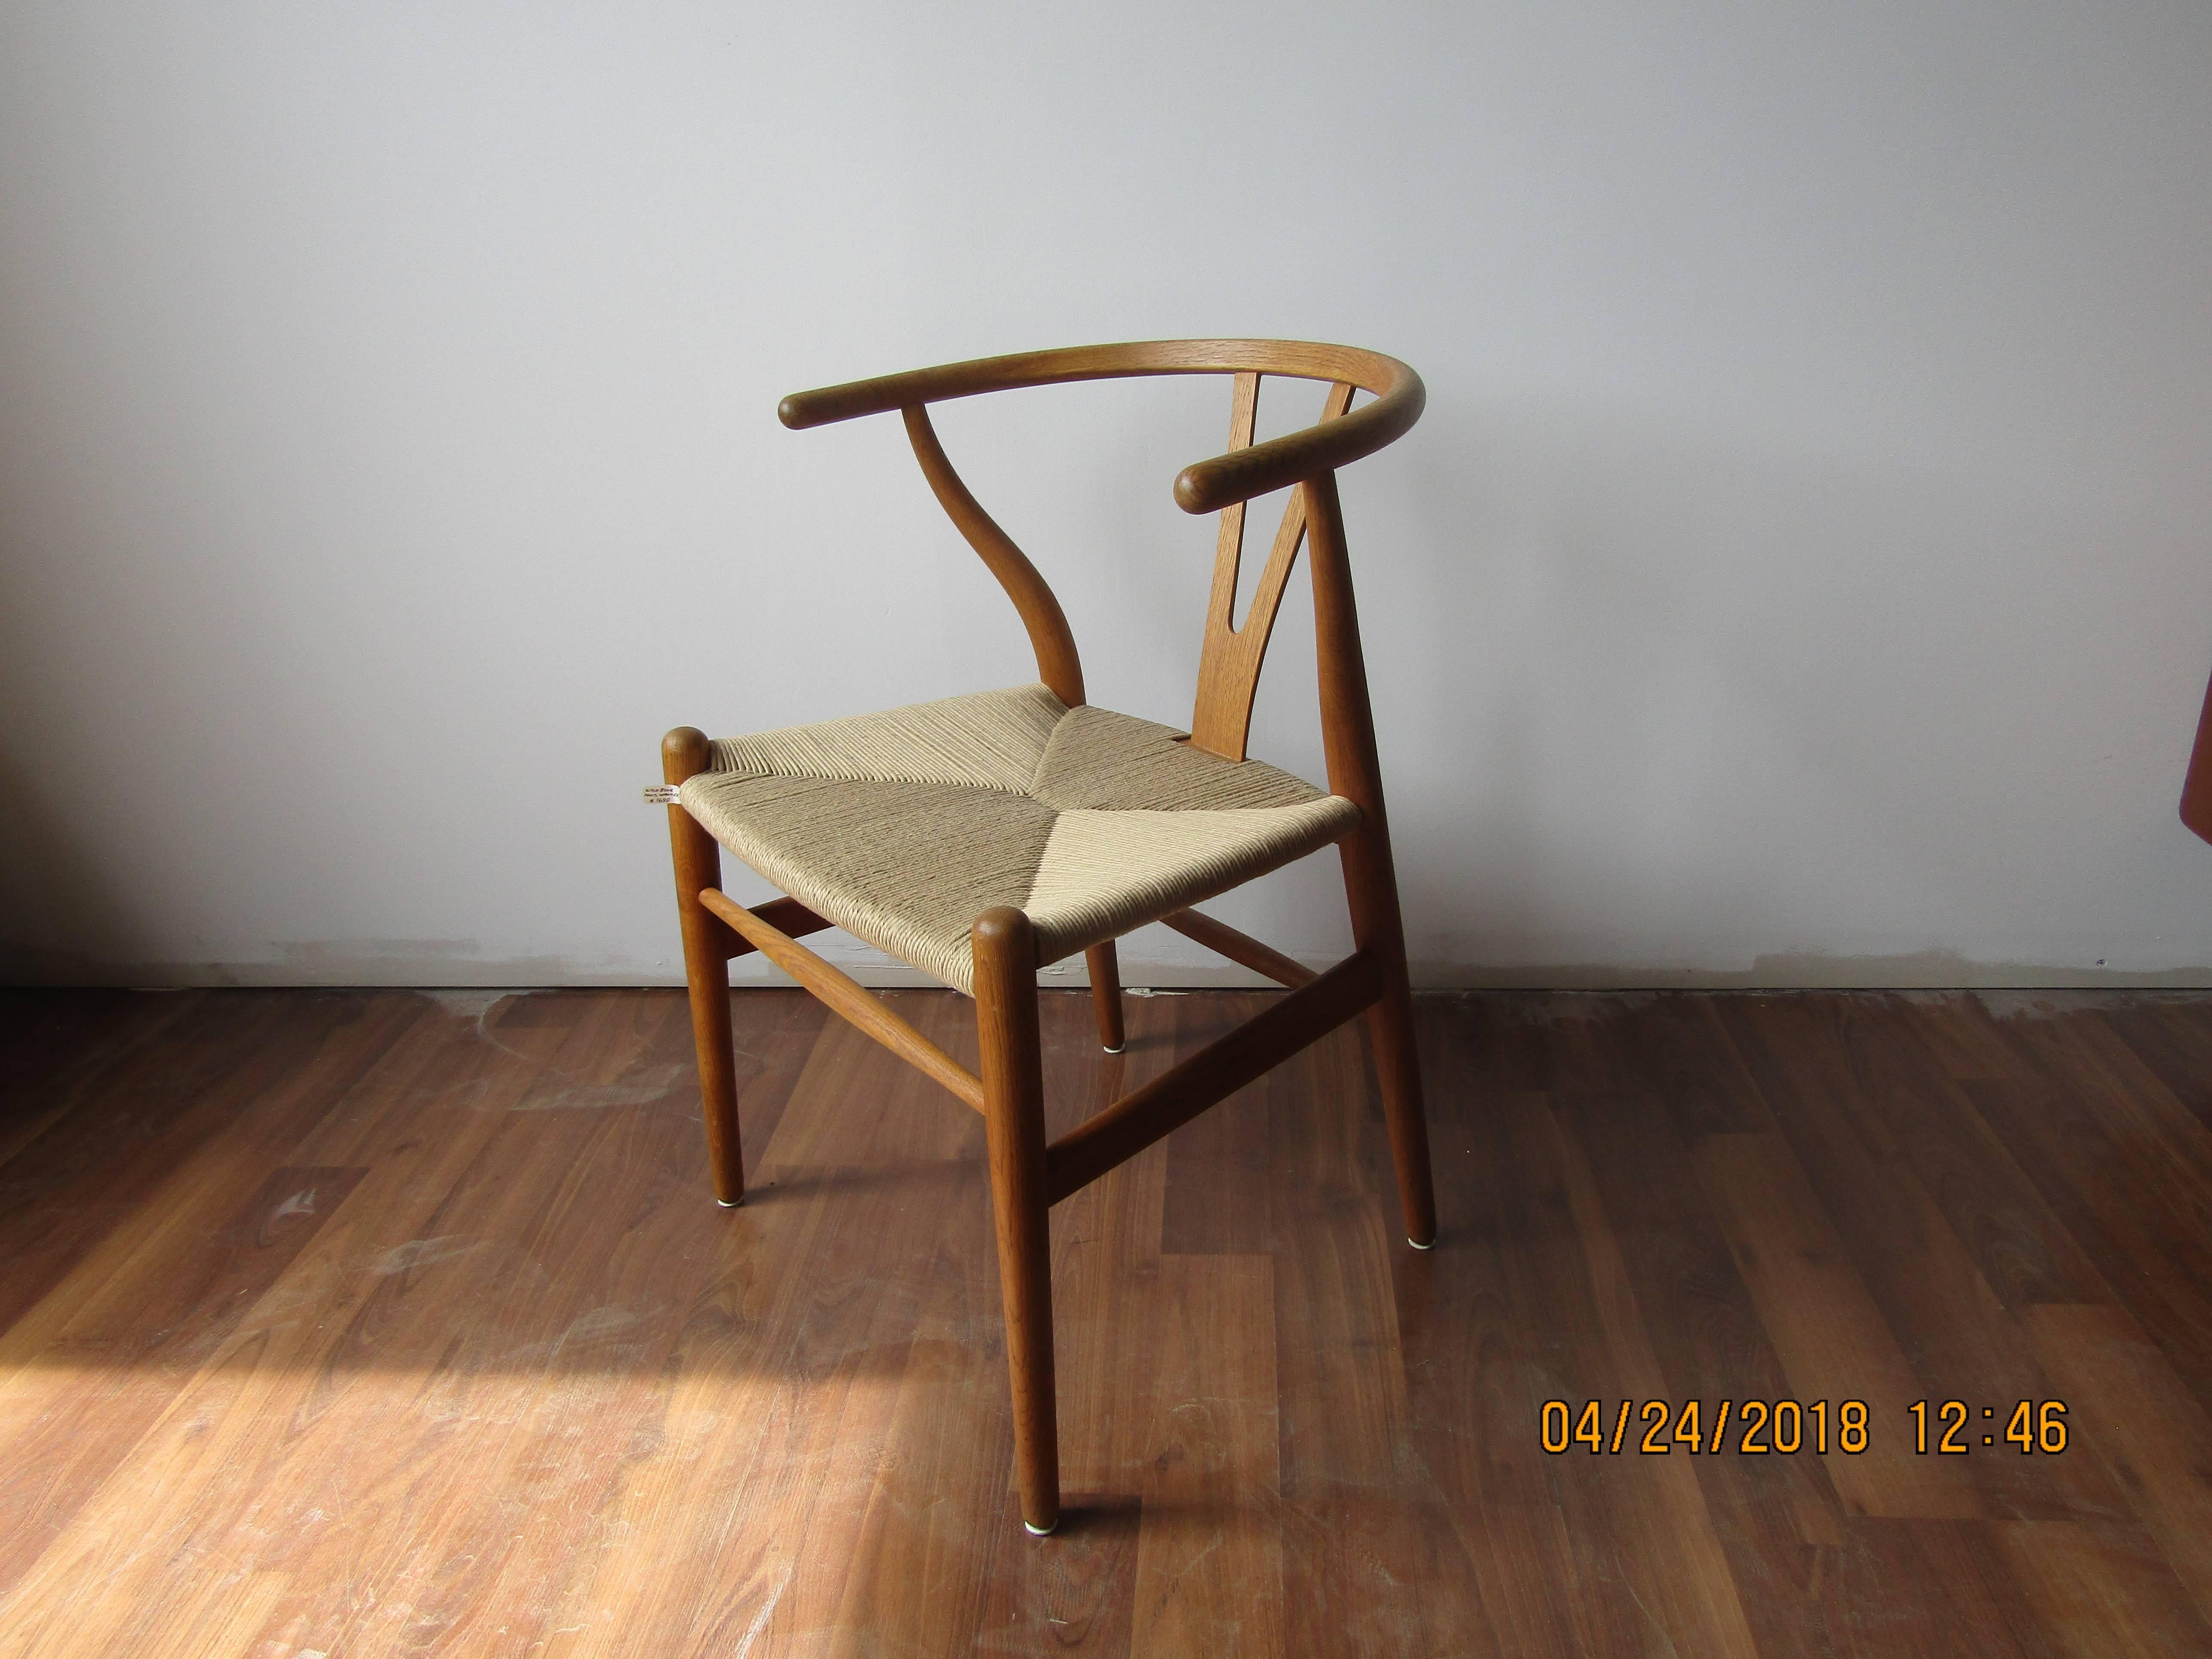 Set of four wishbone chairs by Hans Wegner in white oak and papercord.